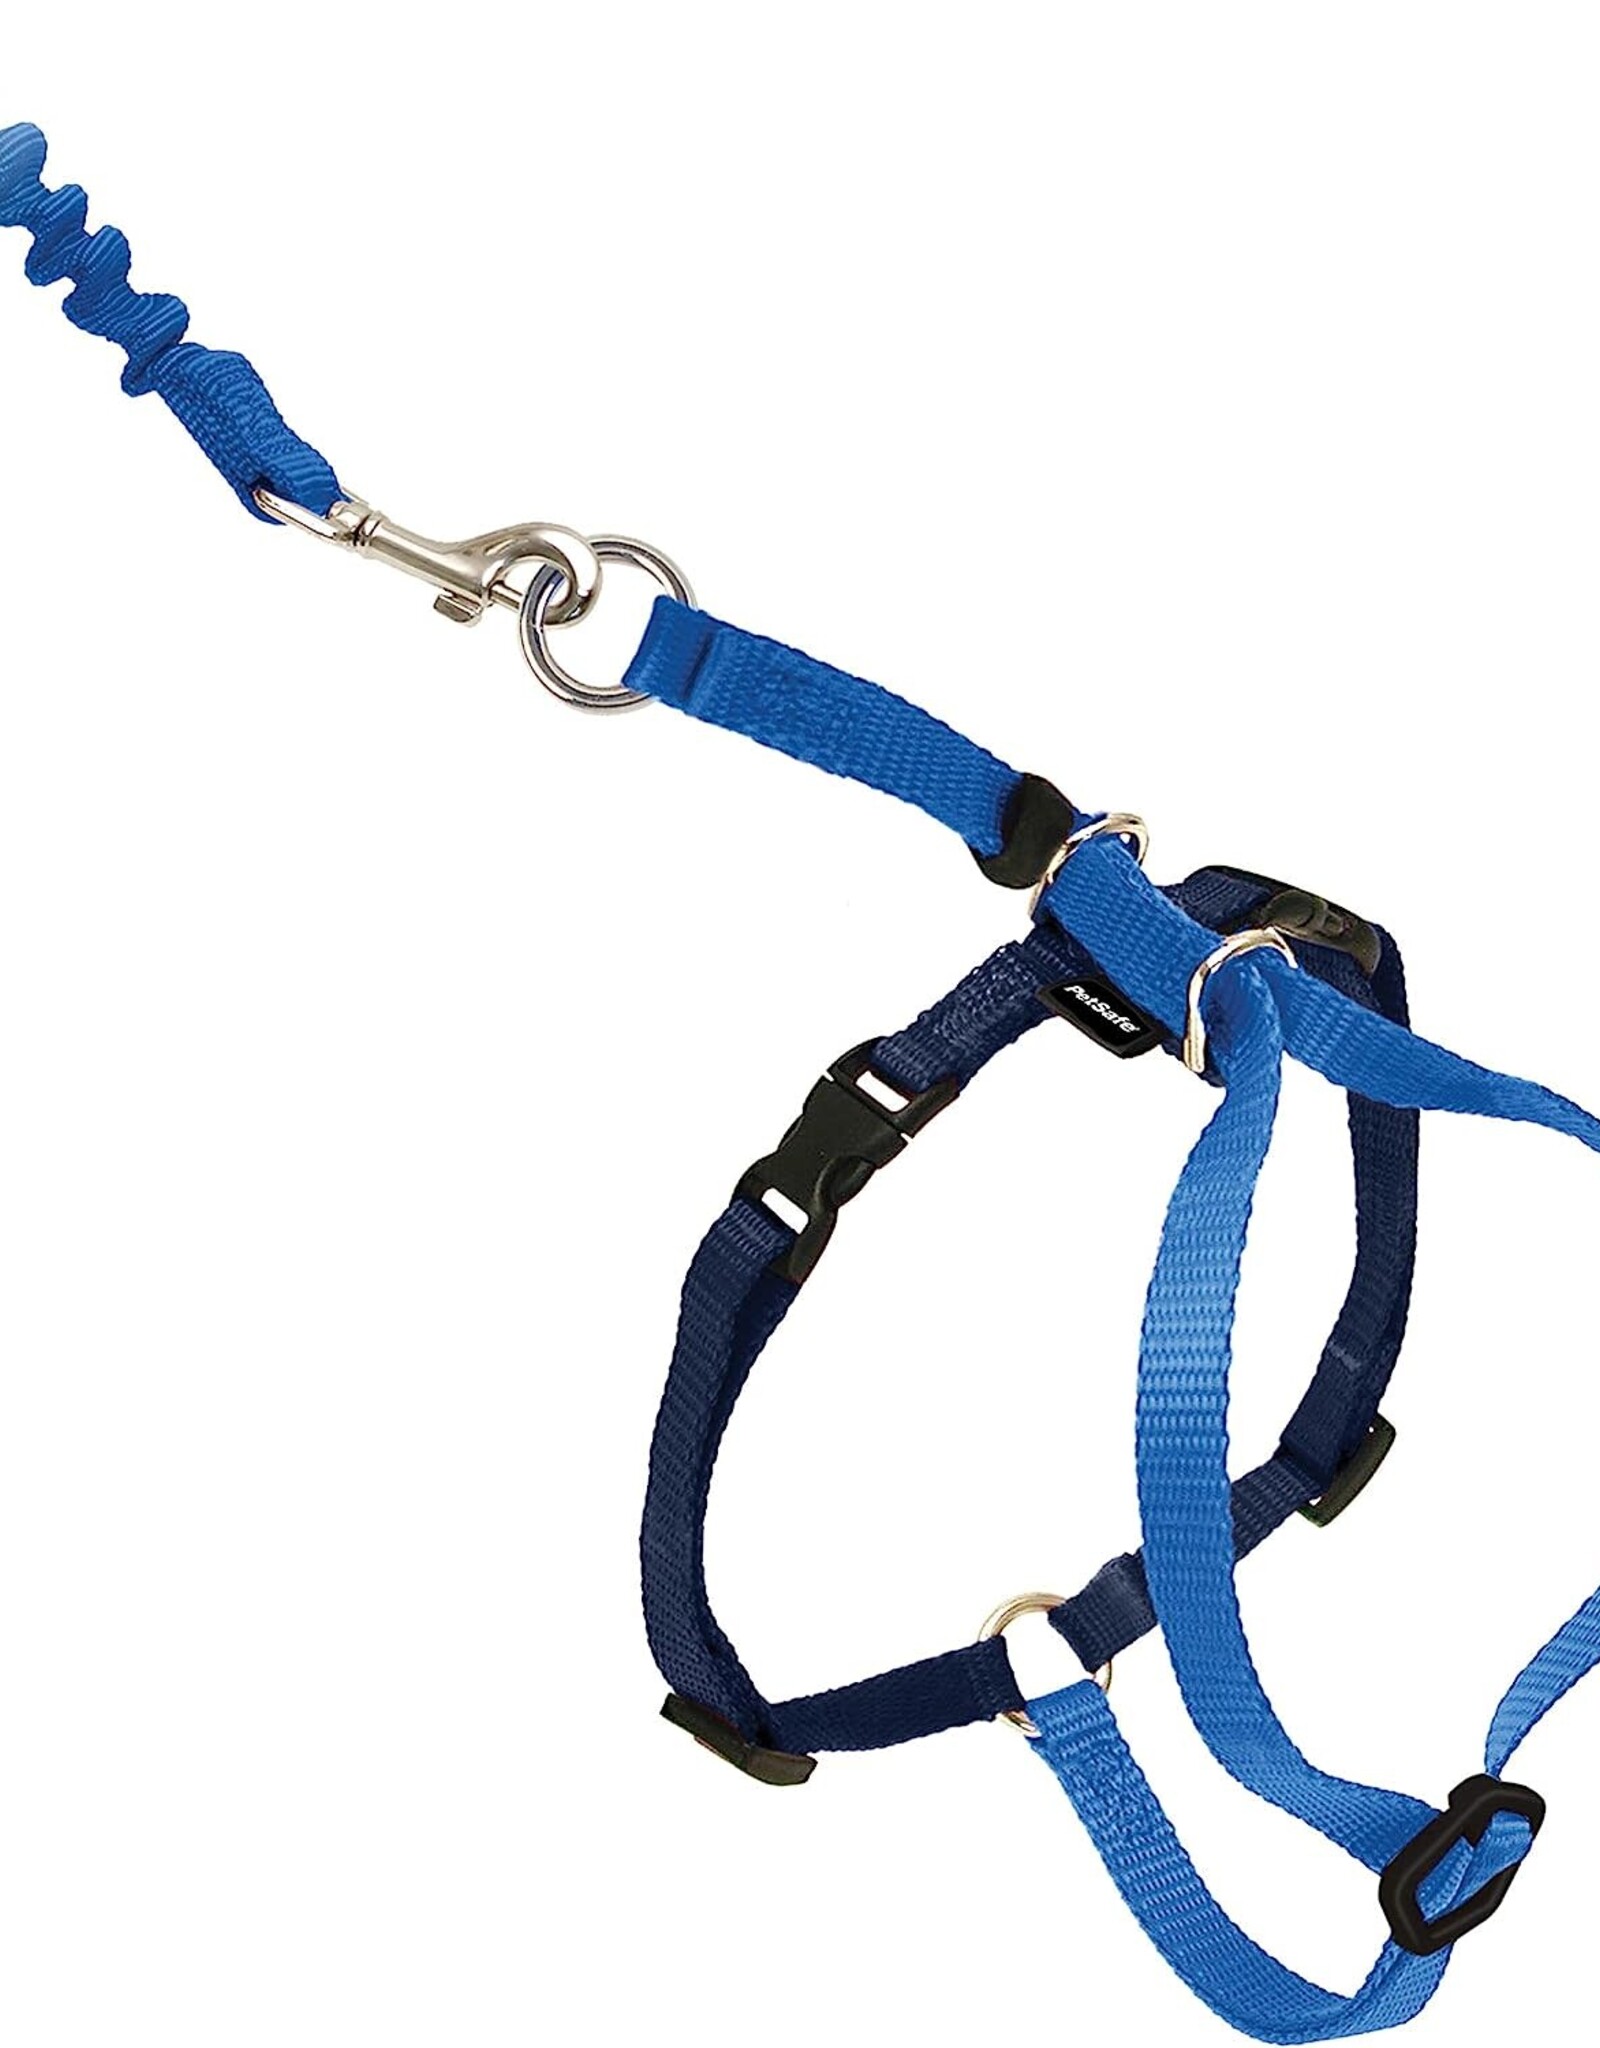 RADIO SYSTEMS CORP(PET SAFE) Come With Me Kitty Harness & Bungee Leash Small Royal Blue